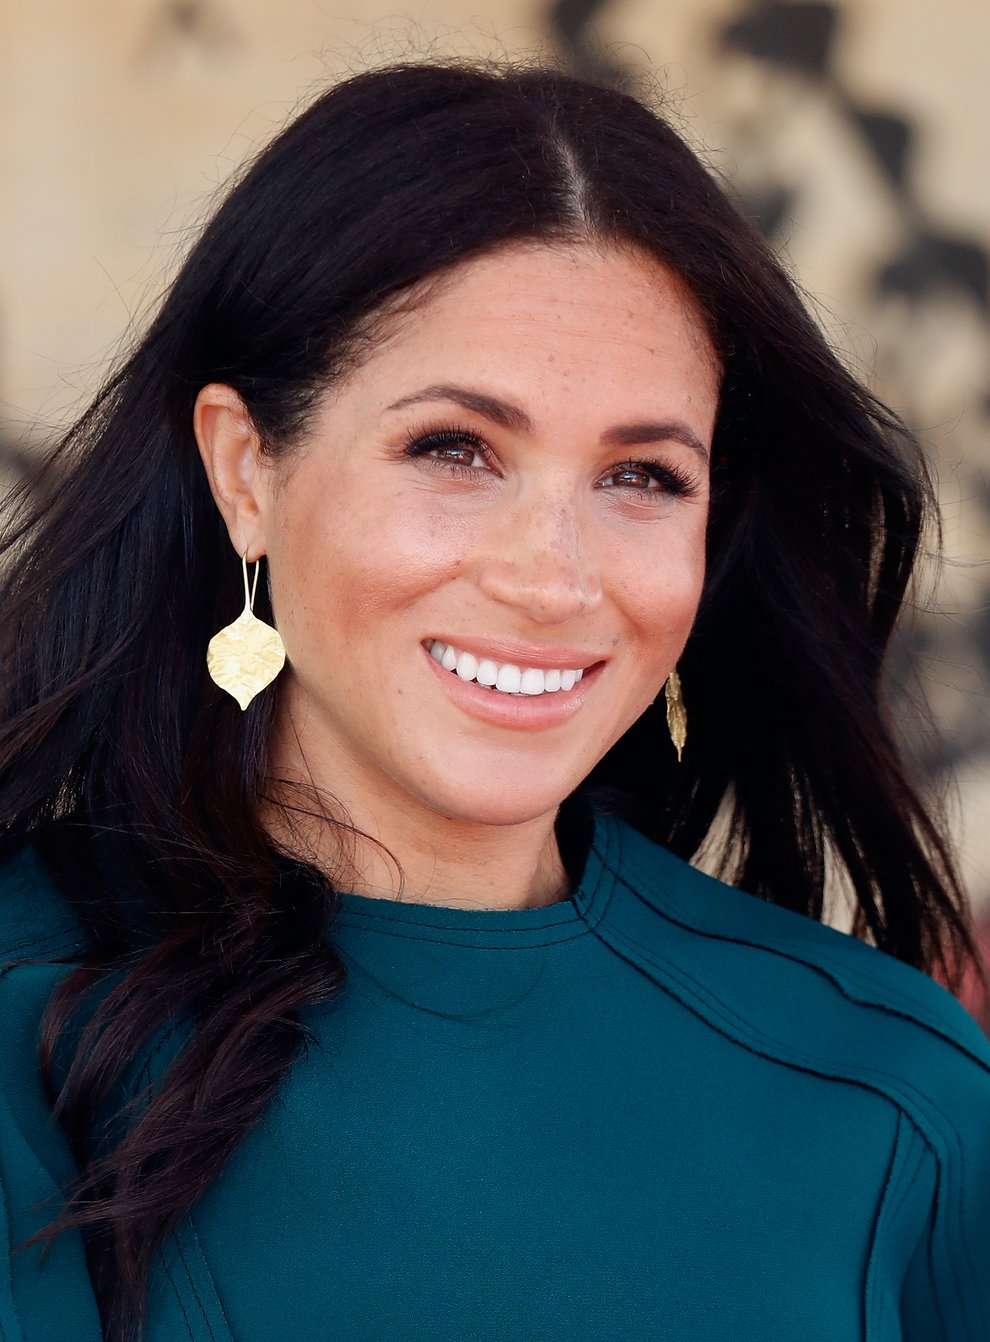 The Duchess of Sussex is suing Associated Newspapers over five articles